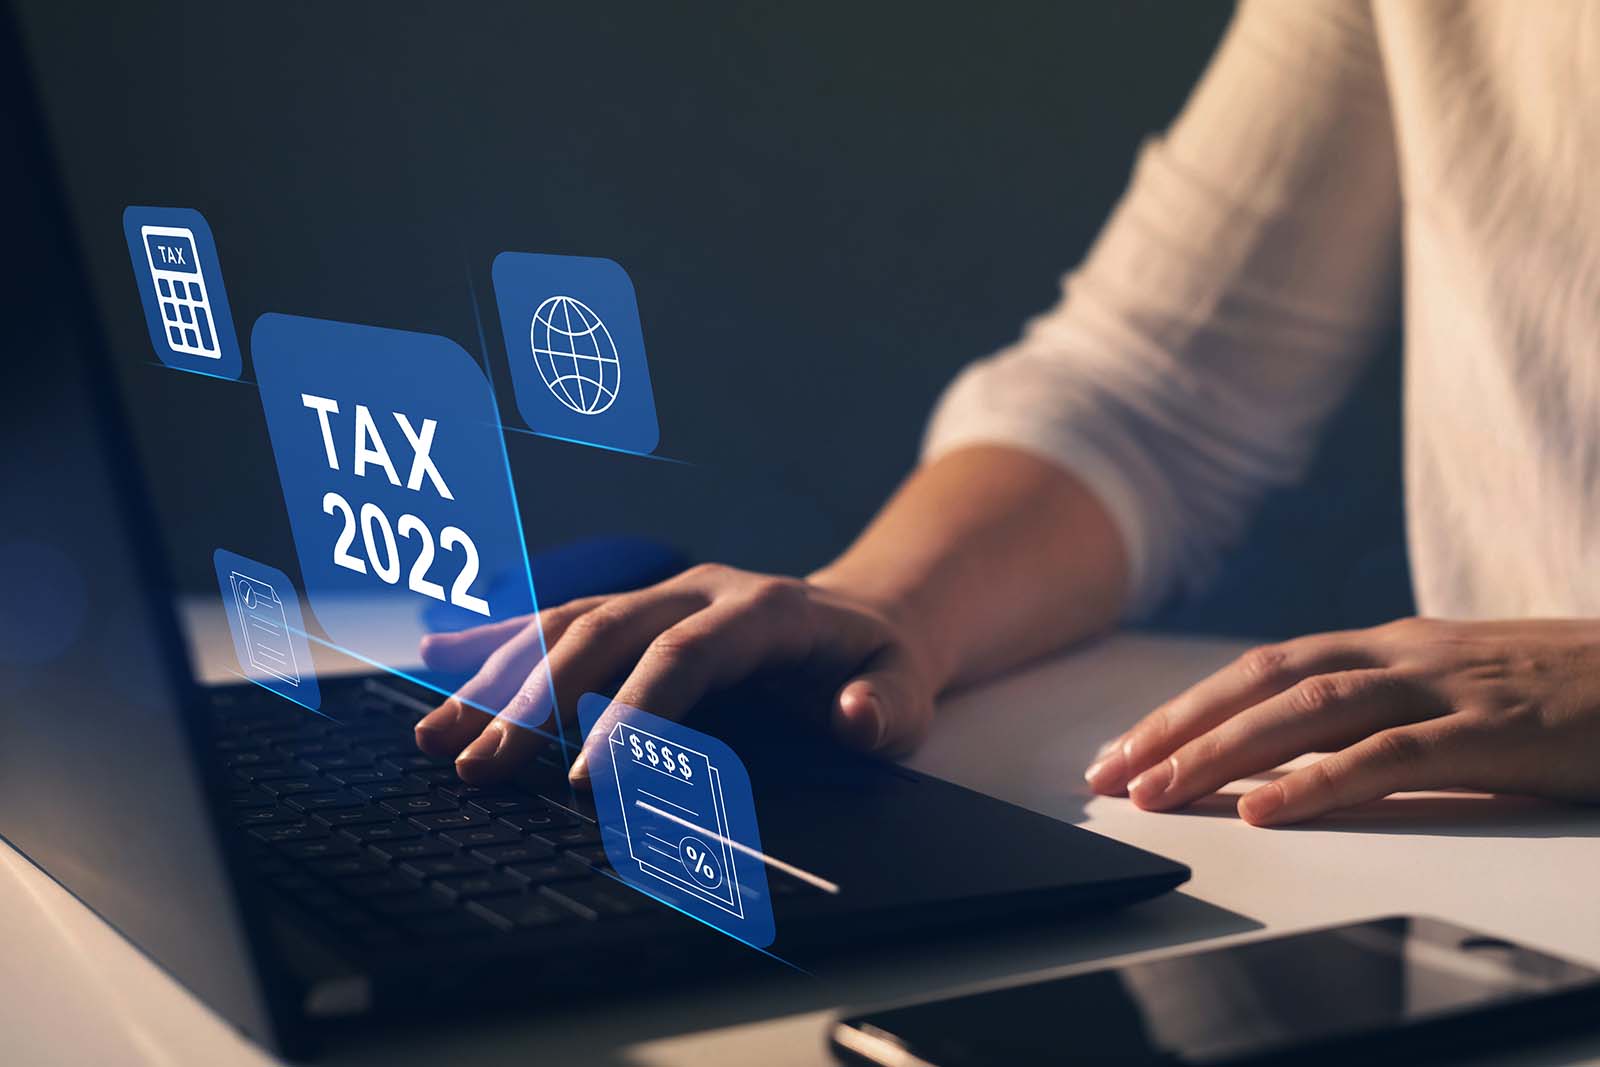 Tax exemption for 200 lei applicable to gross minimum salary, additional tax reporting obligations for postal and courier services and the implementation of e-Factura system for B2G transactions